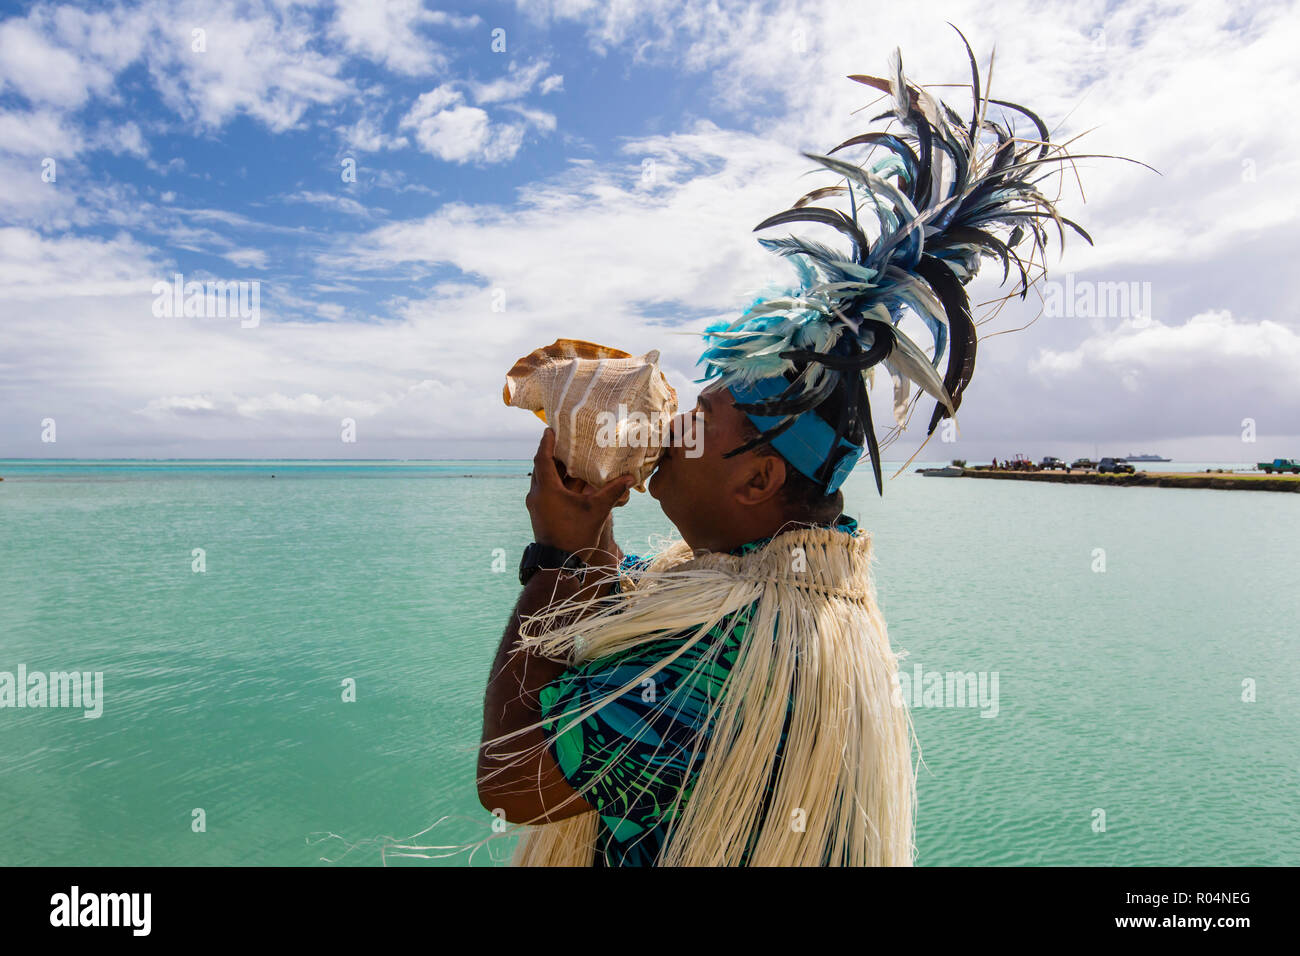 A conch shell blowing warrior welcoming guests to Aitutaki, Cook Islands, South Pacific Islands, Pacific Stock Photo